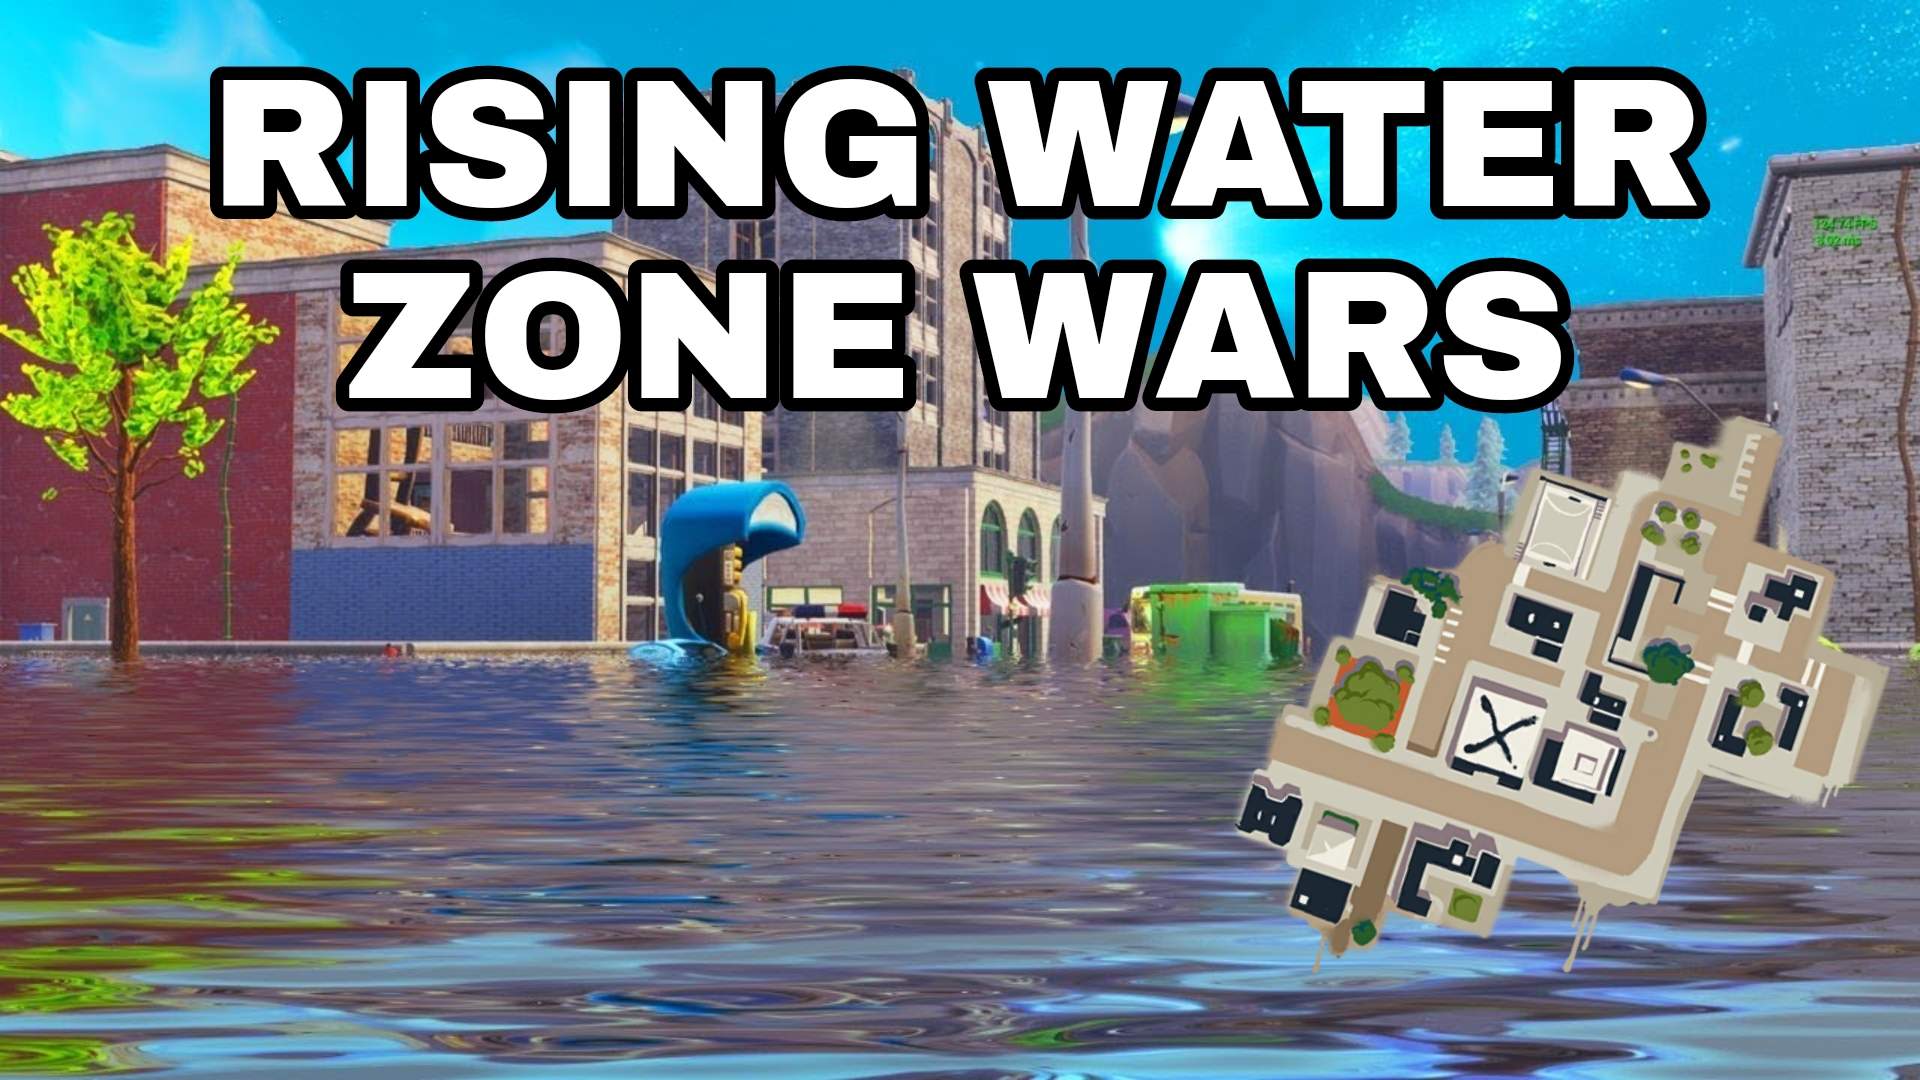 RISING WATER ZONE WARS [TILTED TOWERS]